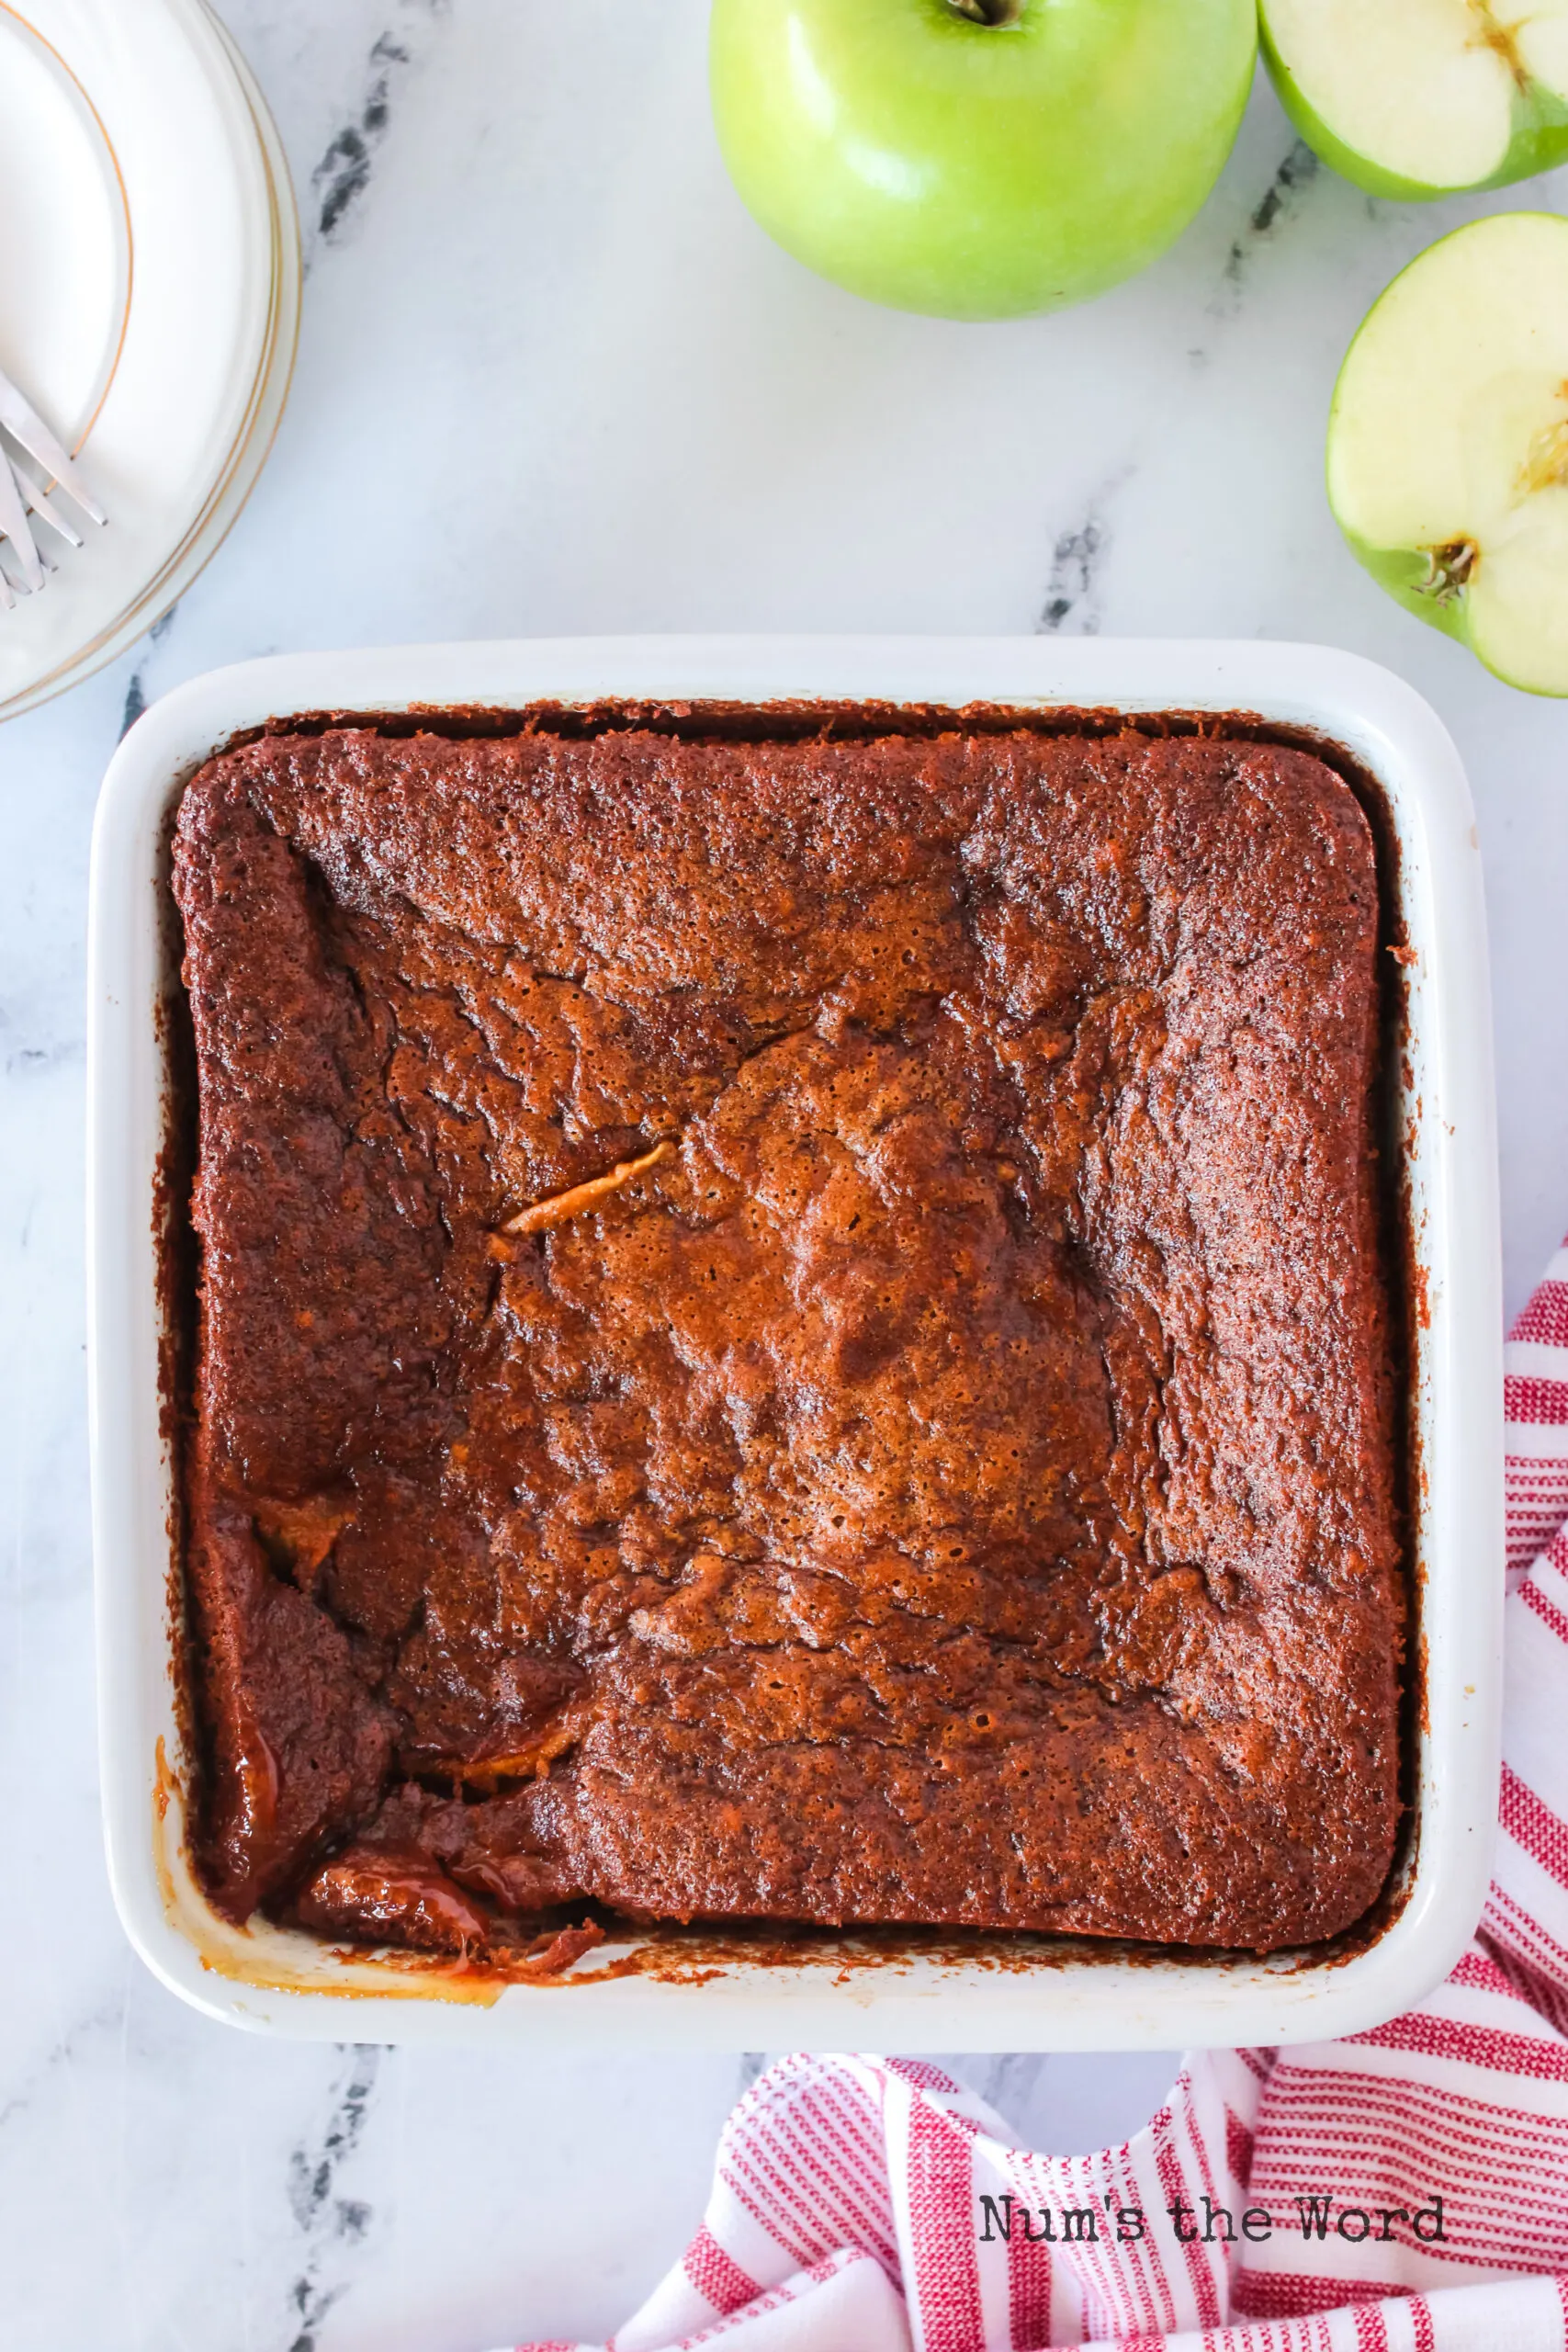 baked gingerbread on top of apples